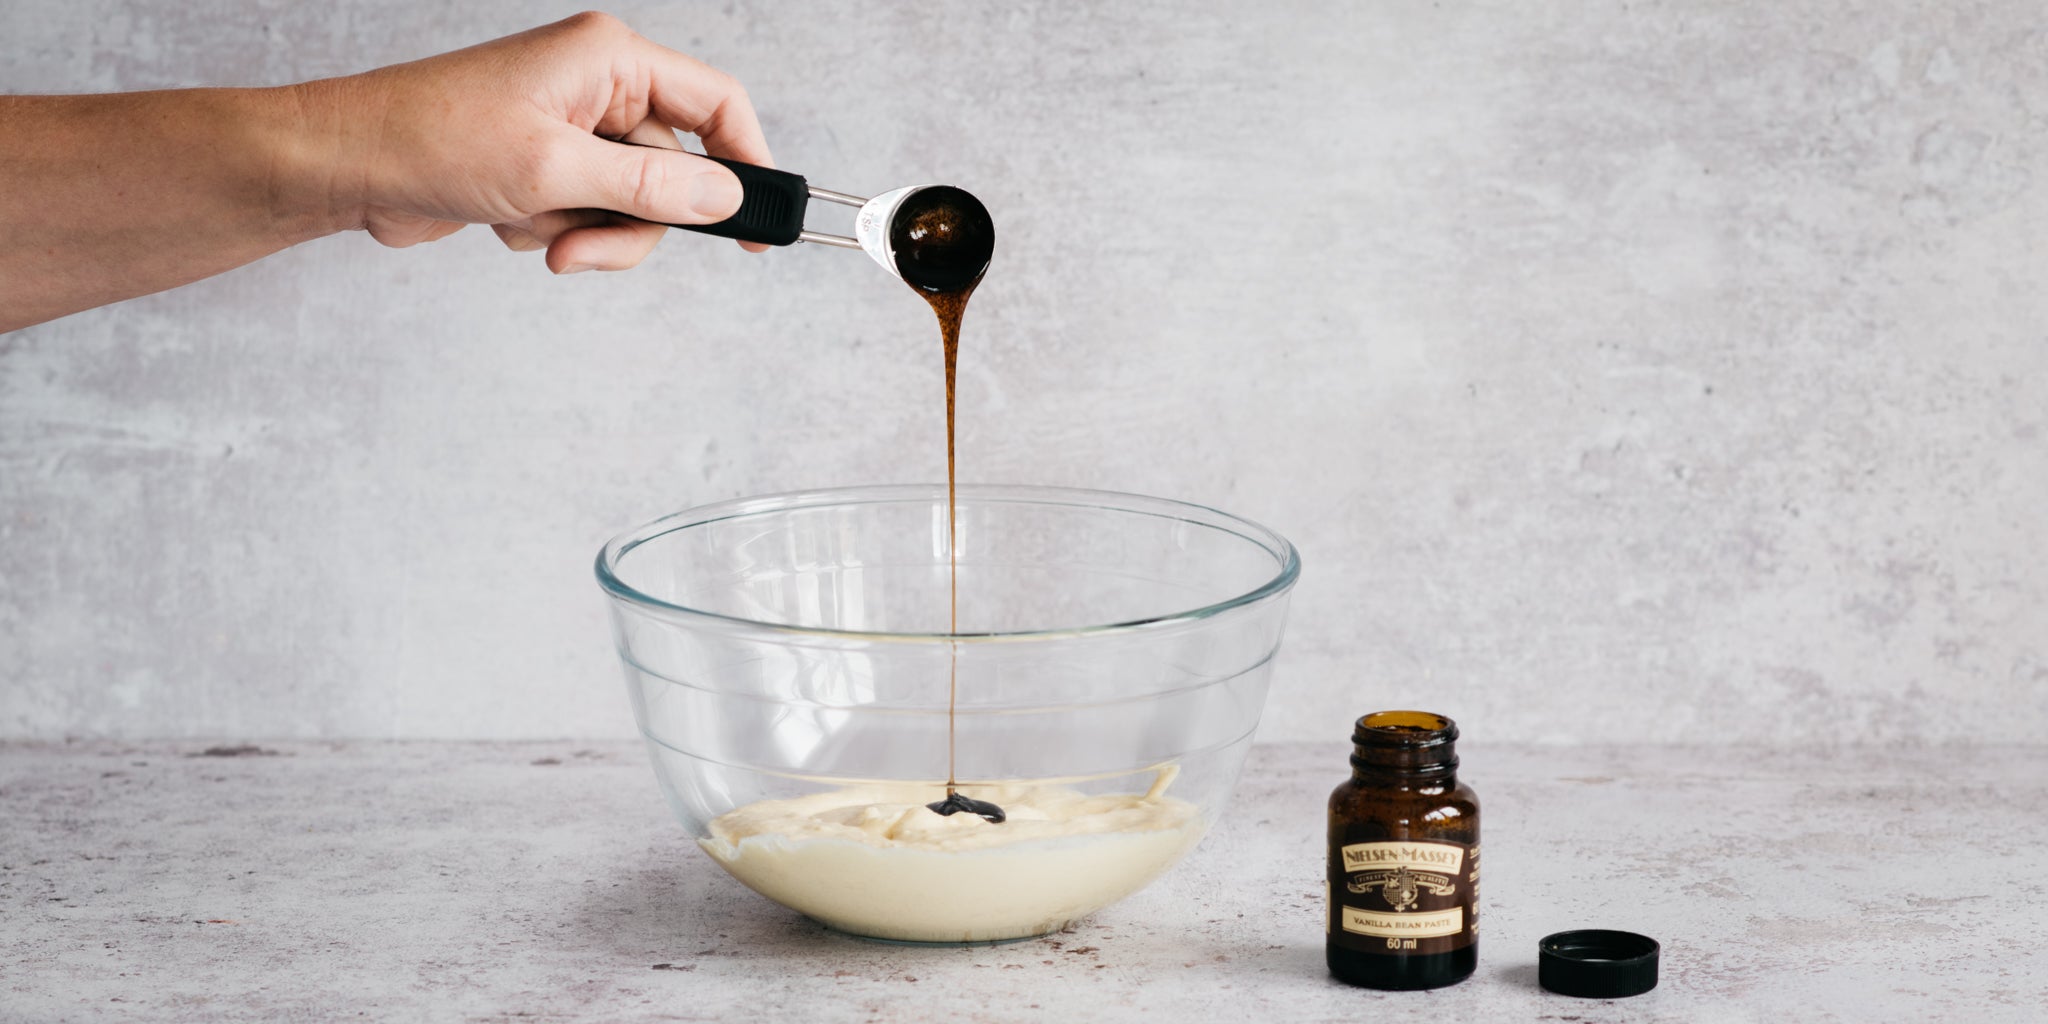 Vegan Vanilla Cake mixture being added to a bowl, with a generous helping of Nielsen Massey Vanilla paste